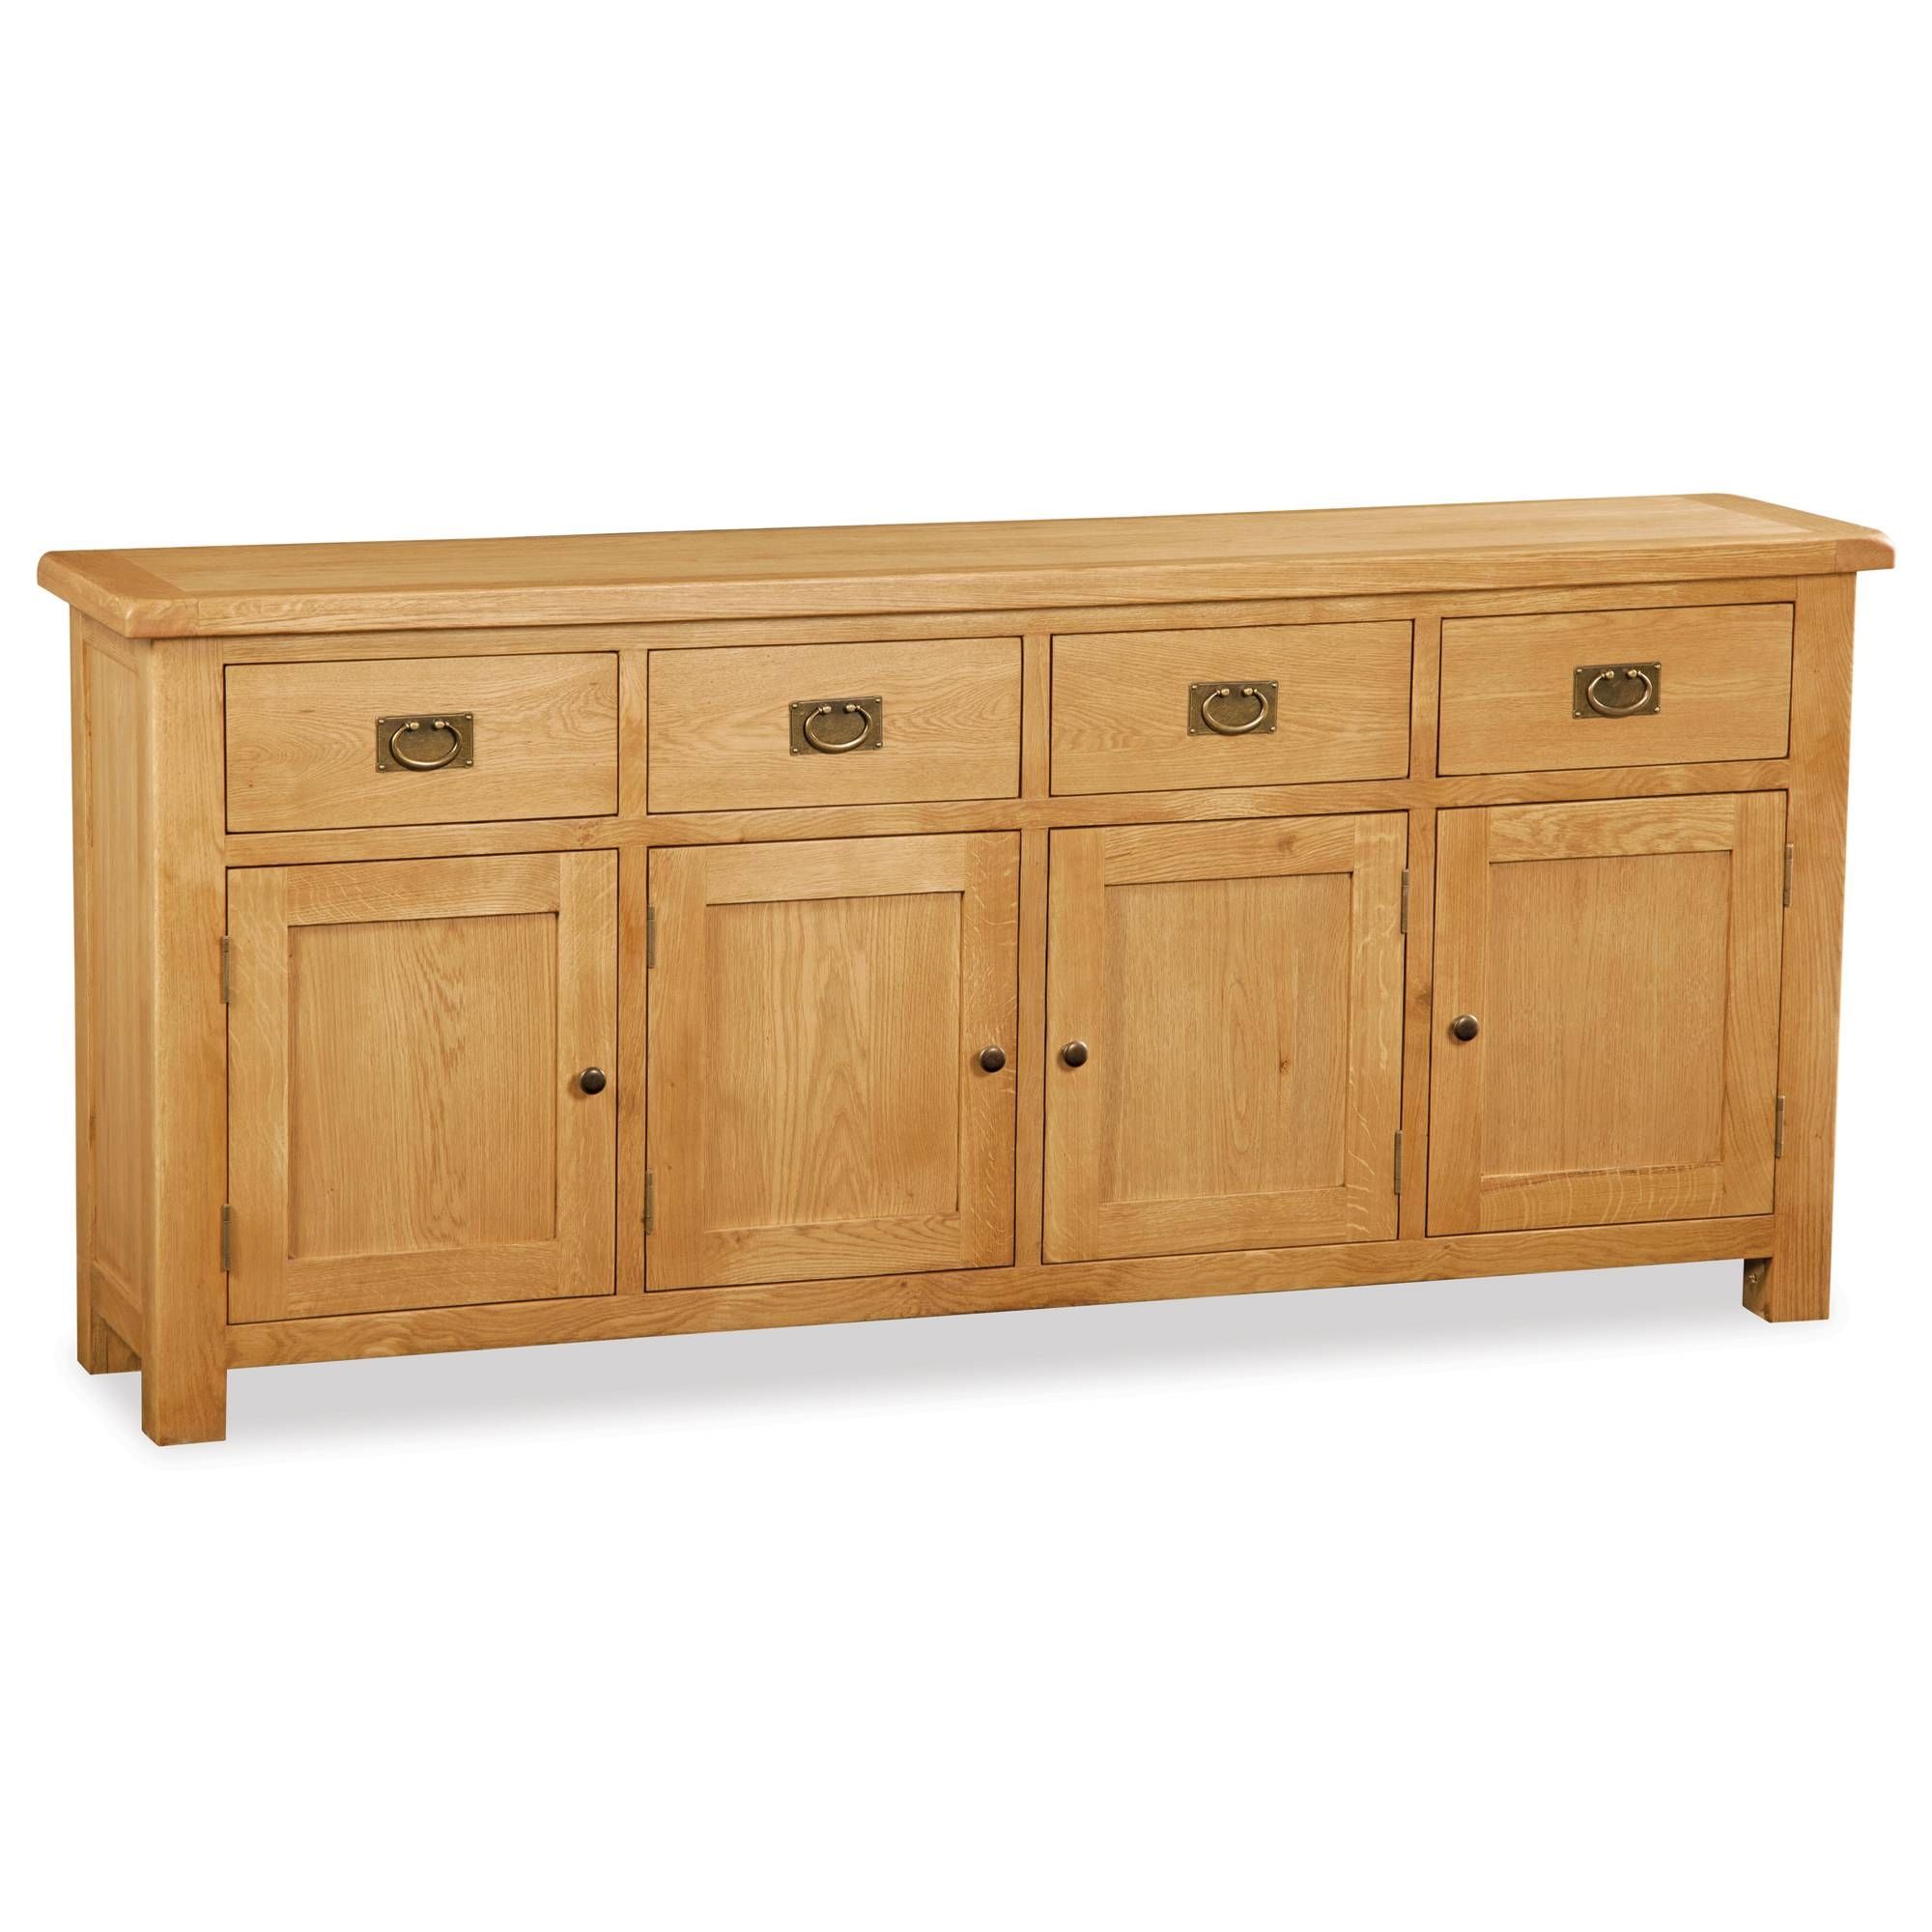 Cardington Extra Large Solid Oak Sideboard Intended For Solid Oak Sideboards (View 1 of 15)